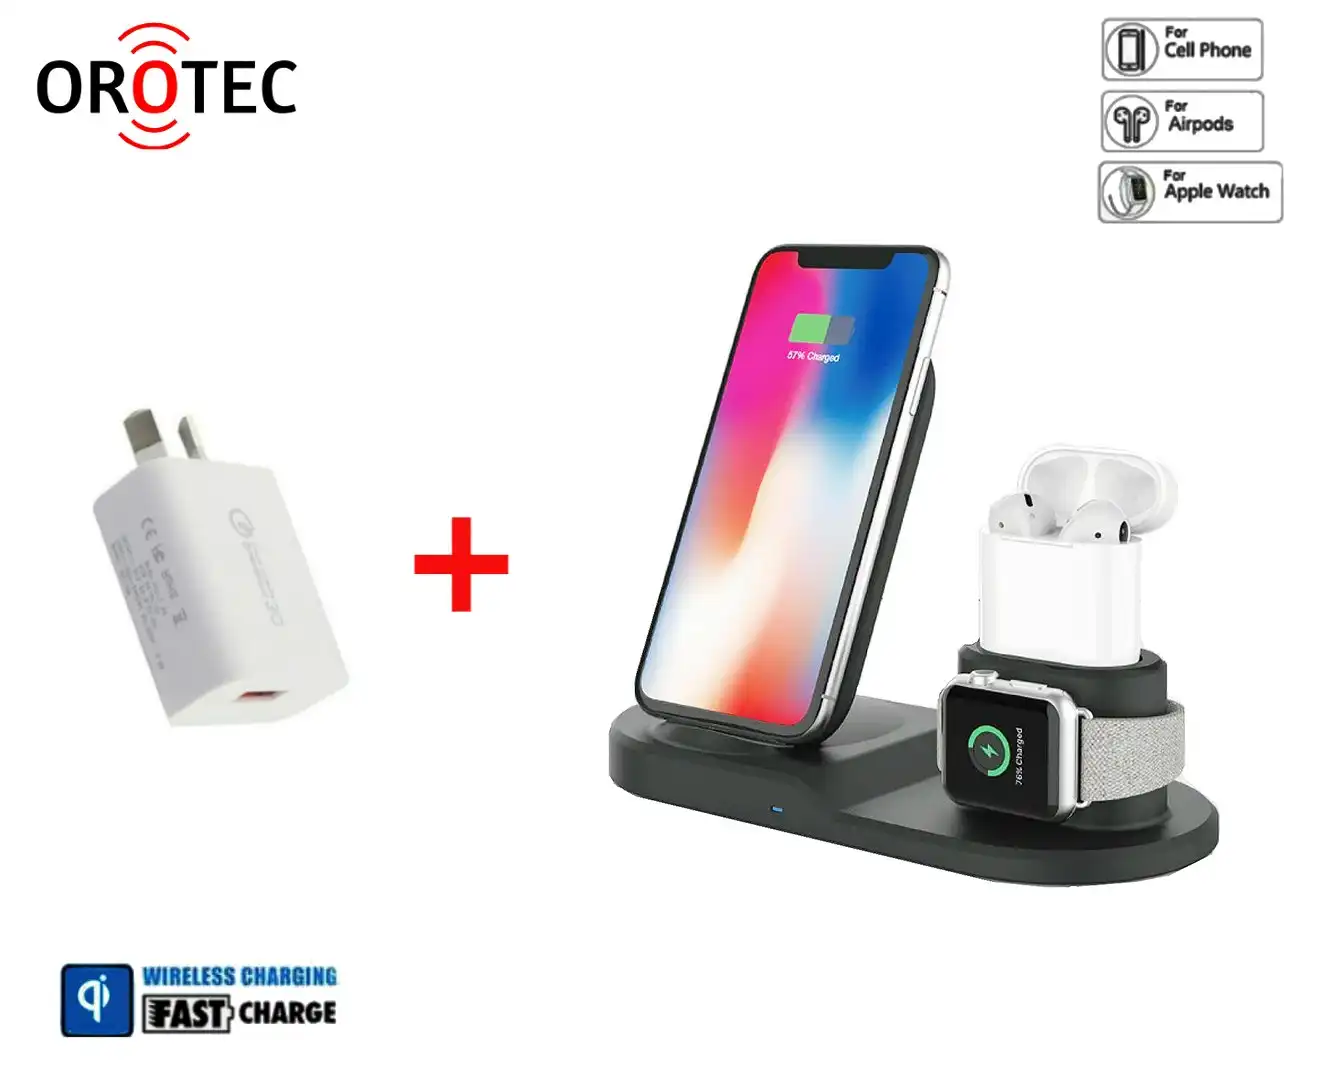 Orotec 5-in-1 Wireless Charger Docking Station